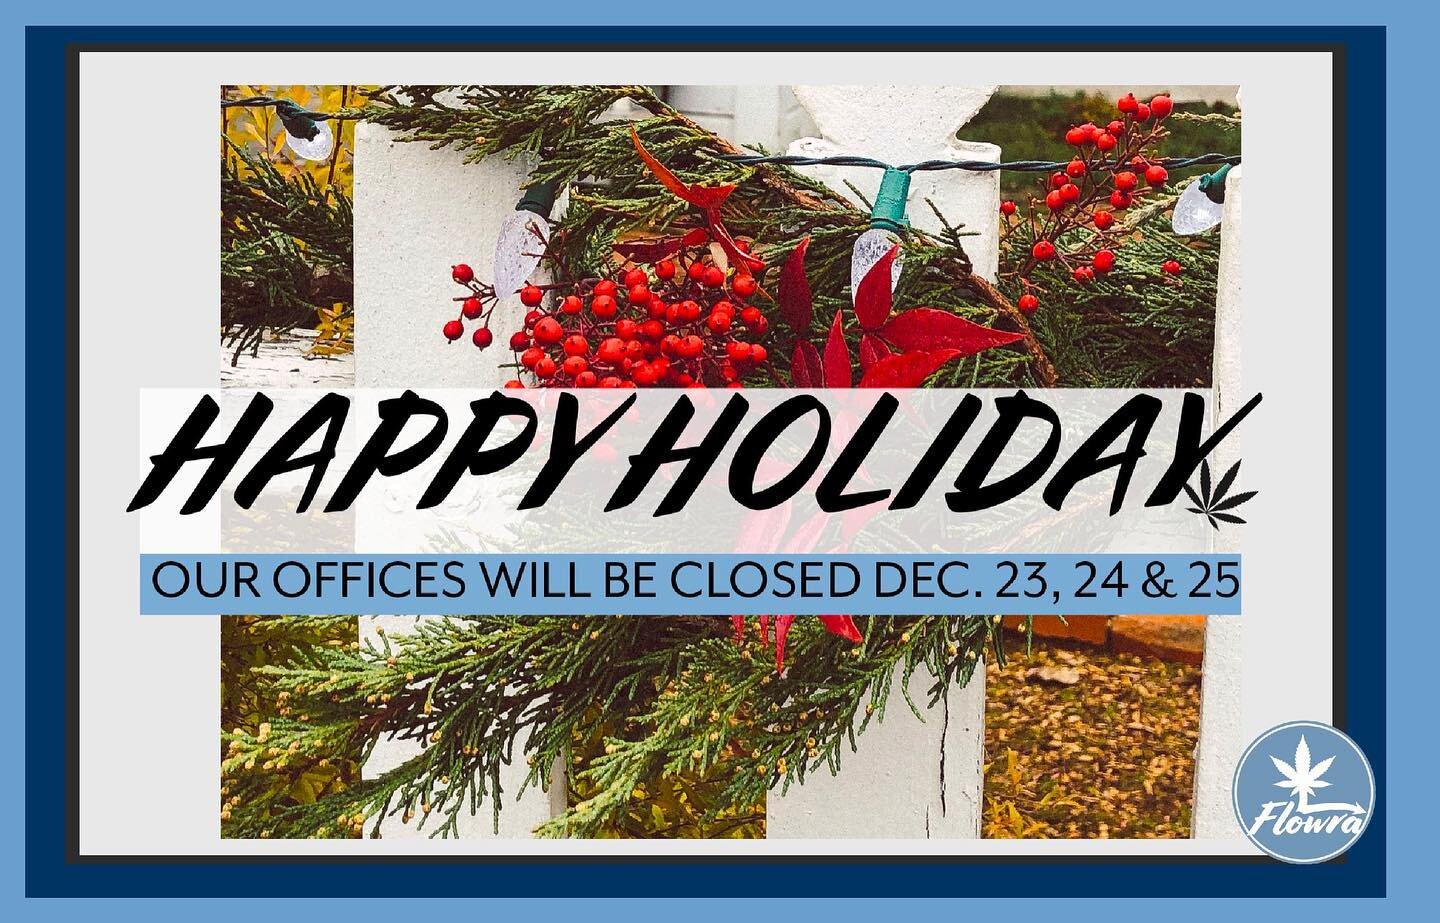 Flowra wishes you love, light &amp; levity this holiday season. Our offices will be closed Dec. 23, 24 &amp; 25. #cannabiscommunity #trinitycounty #cannabiz